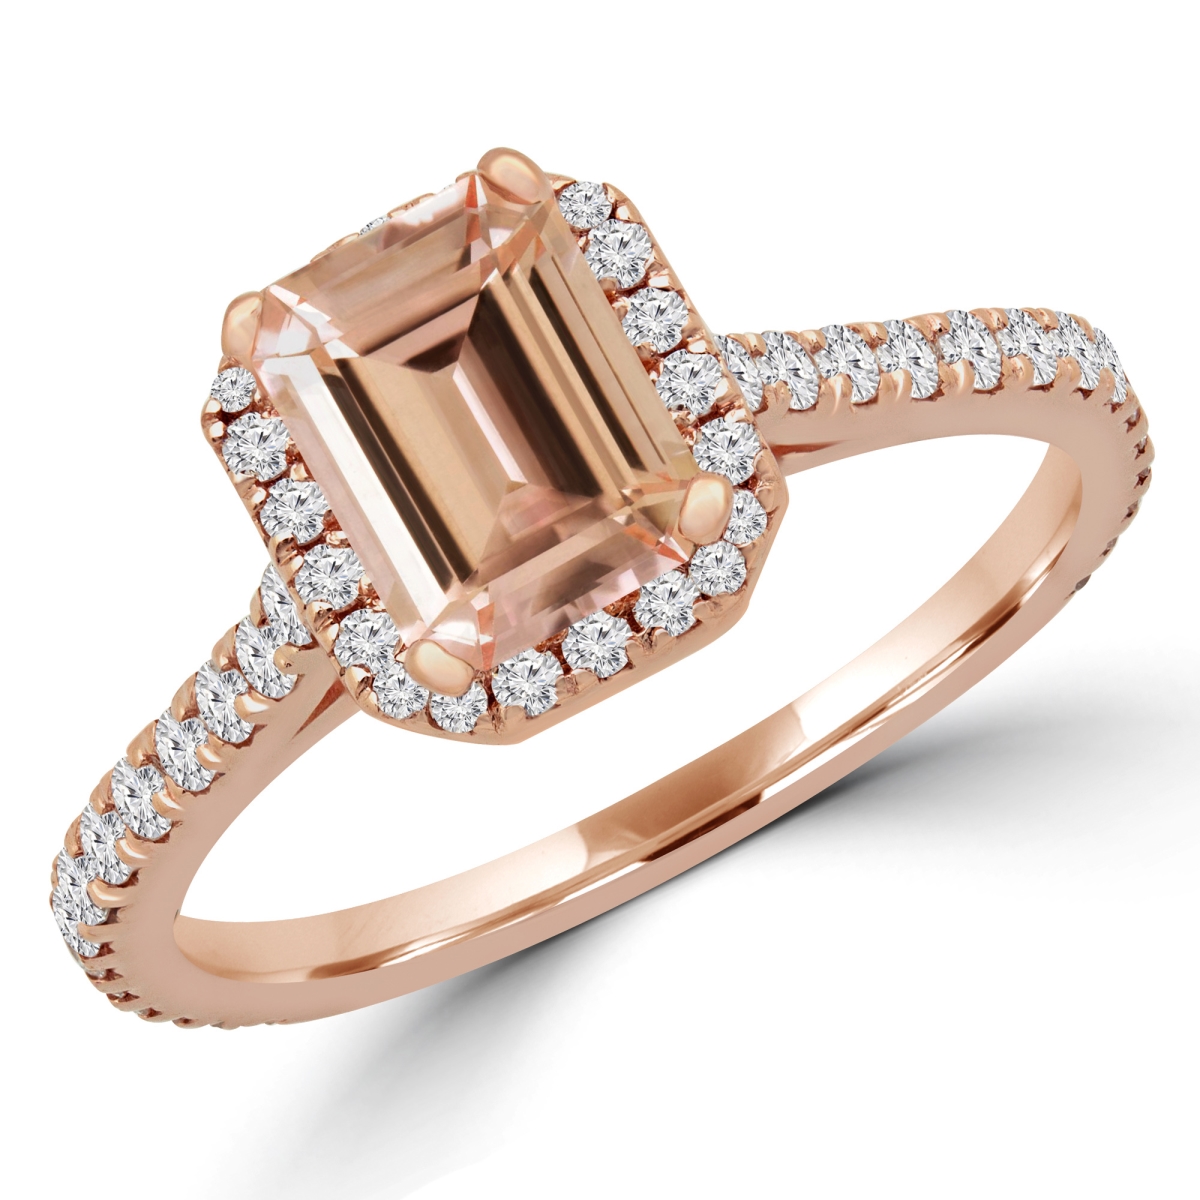 Picture of Majesty Diamonds MD180580-3.25 1.25 CTW Emerald Pink Morganite Halo Engagement Ring in 14K Rose Gold - Size 3.25